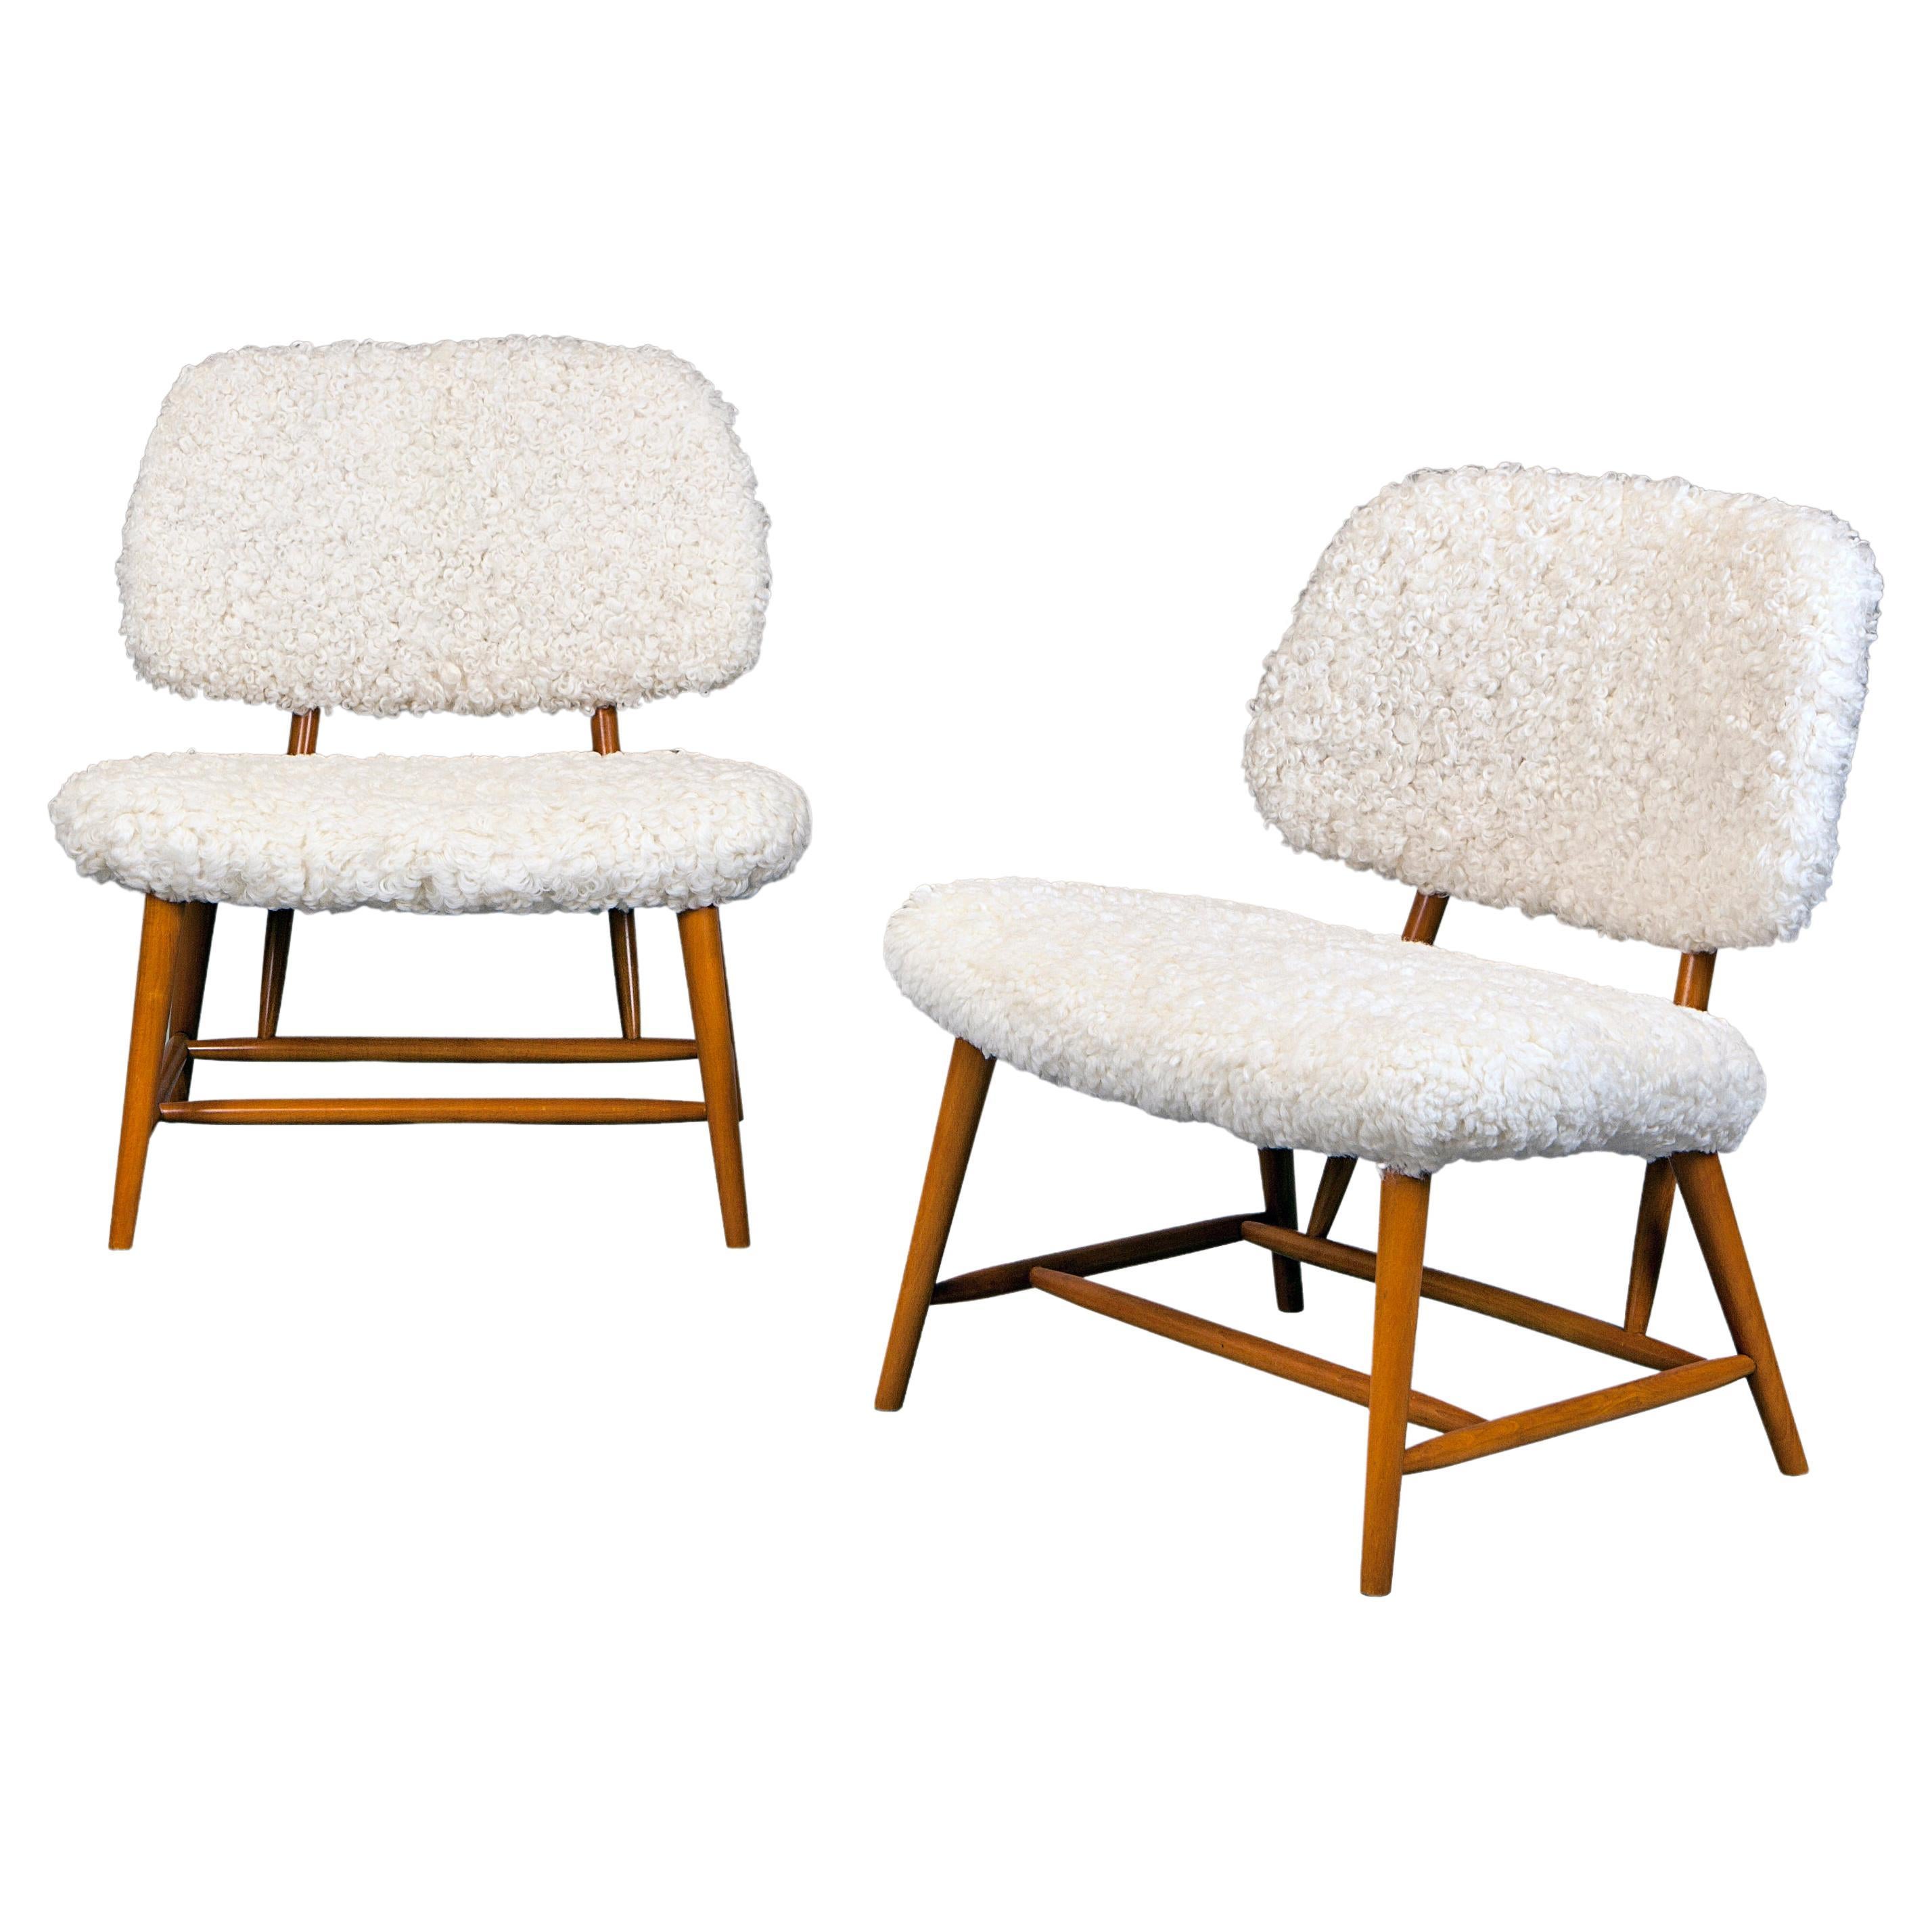 1950's Alf Svensson ''Teve'' Lounge Chairs in Beech and Sheepskin